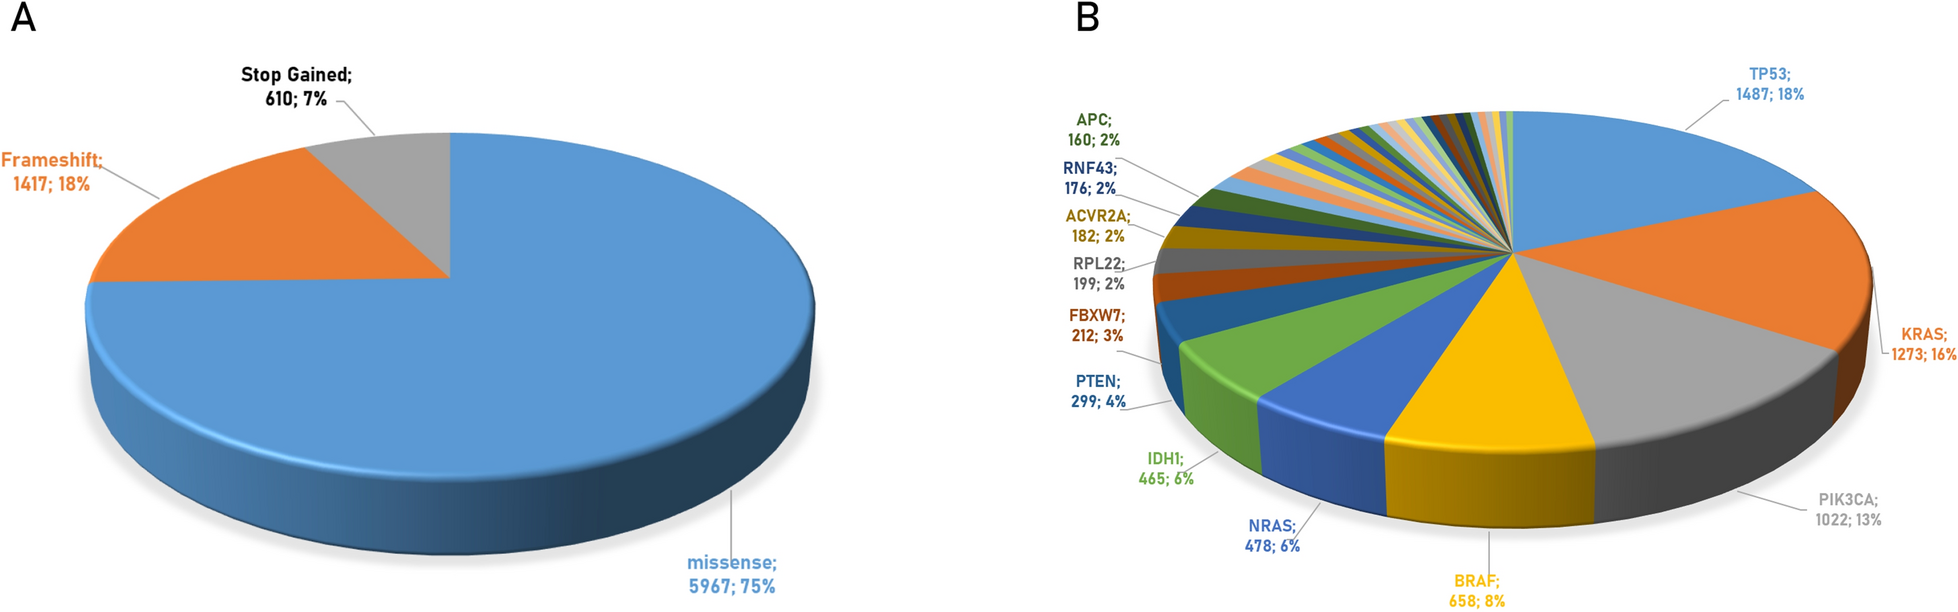 Lack of shared neoantigens in prevalent mutations in cancer